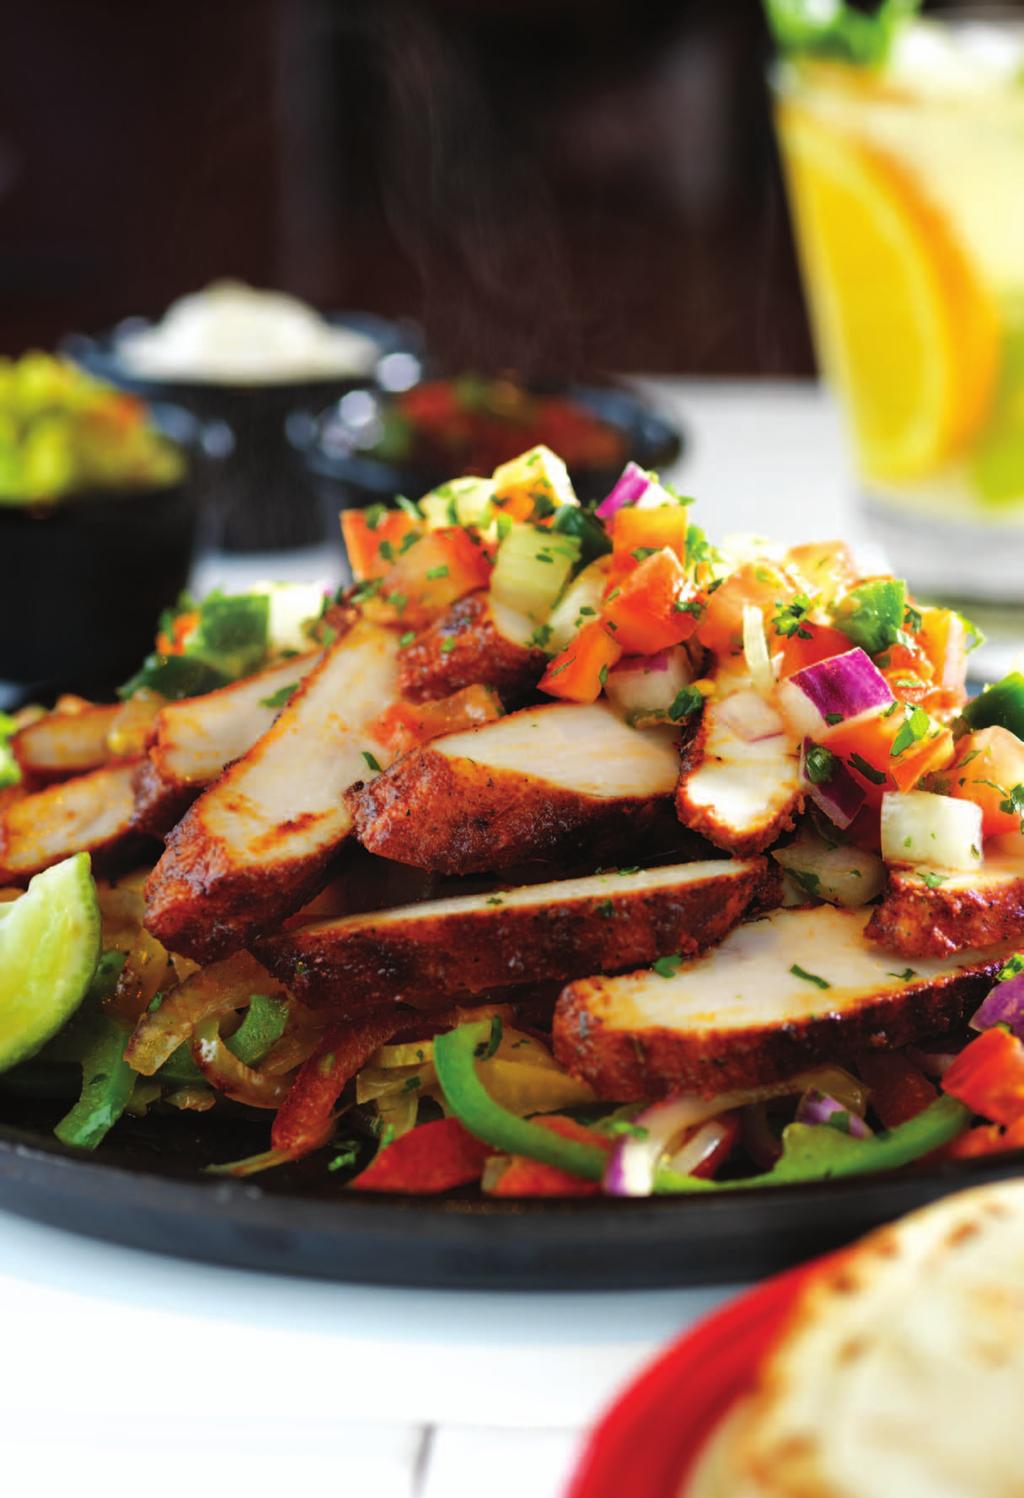 PACKS A Punch! FULL OF FLAVOR Sizzling FAJITAS Served on a hot skillet with Friday s Spicy Guacamole, sour cream, Friday s salsa and warm tortillas.